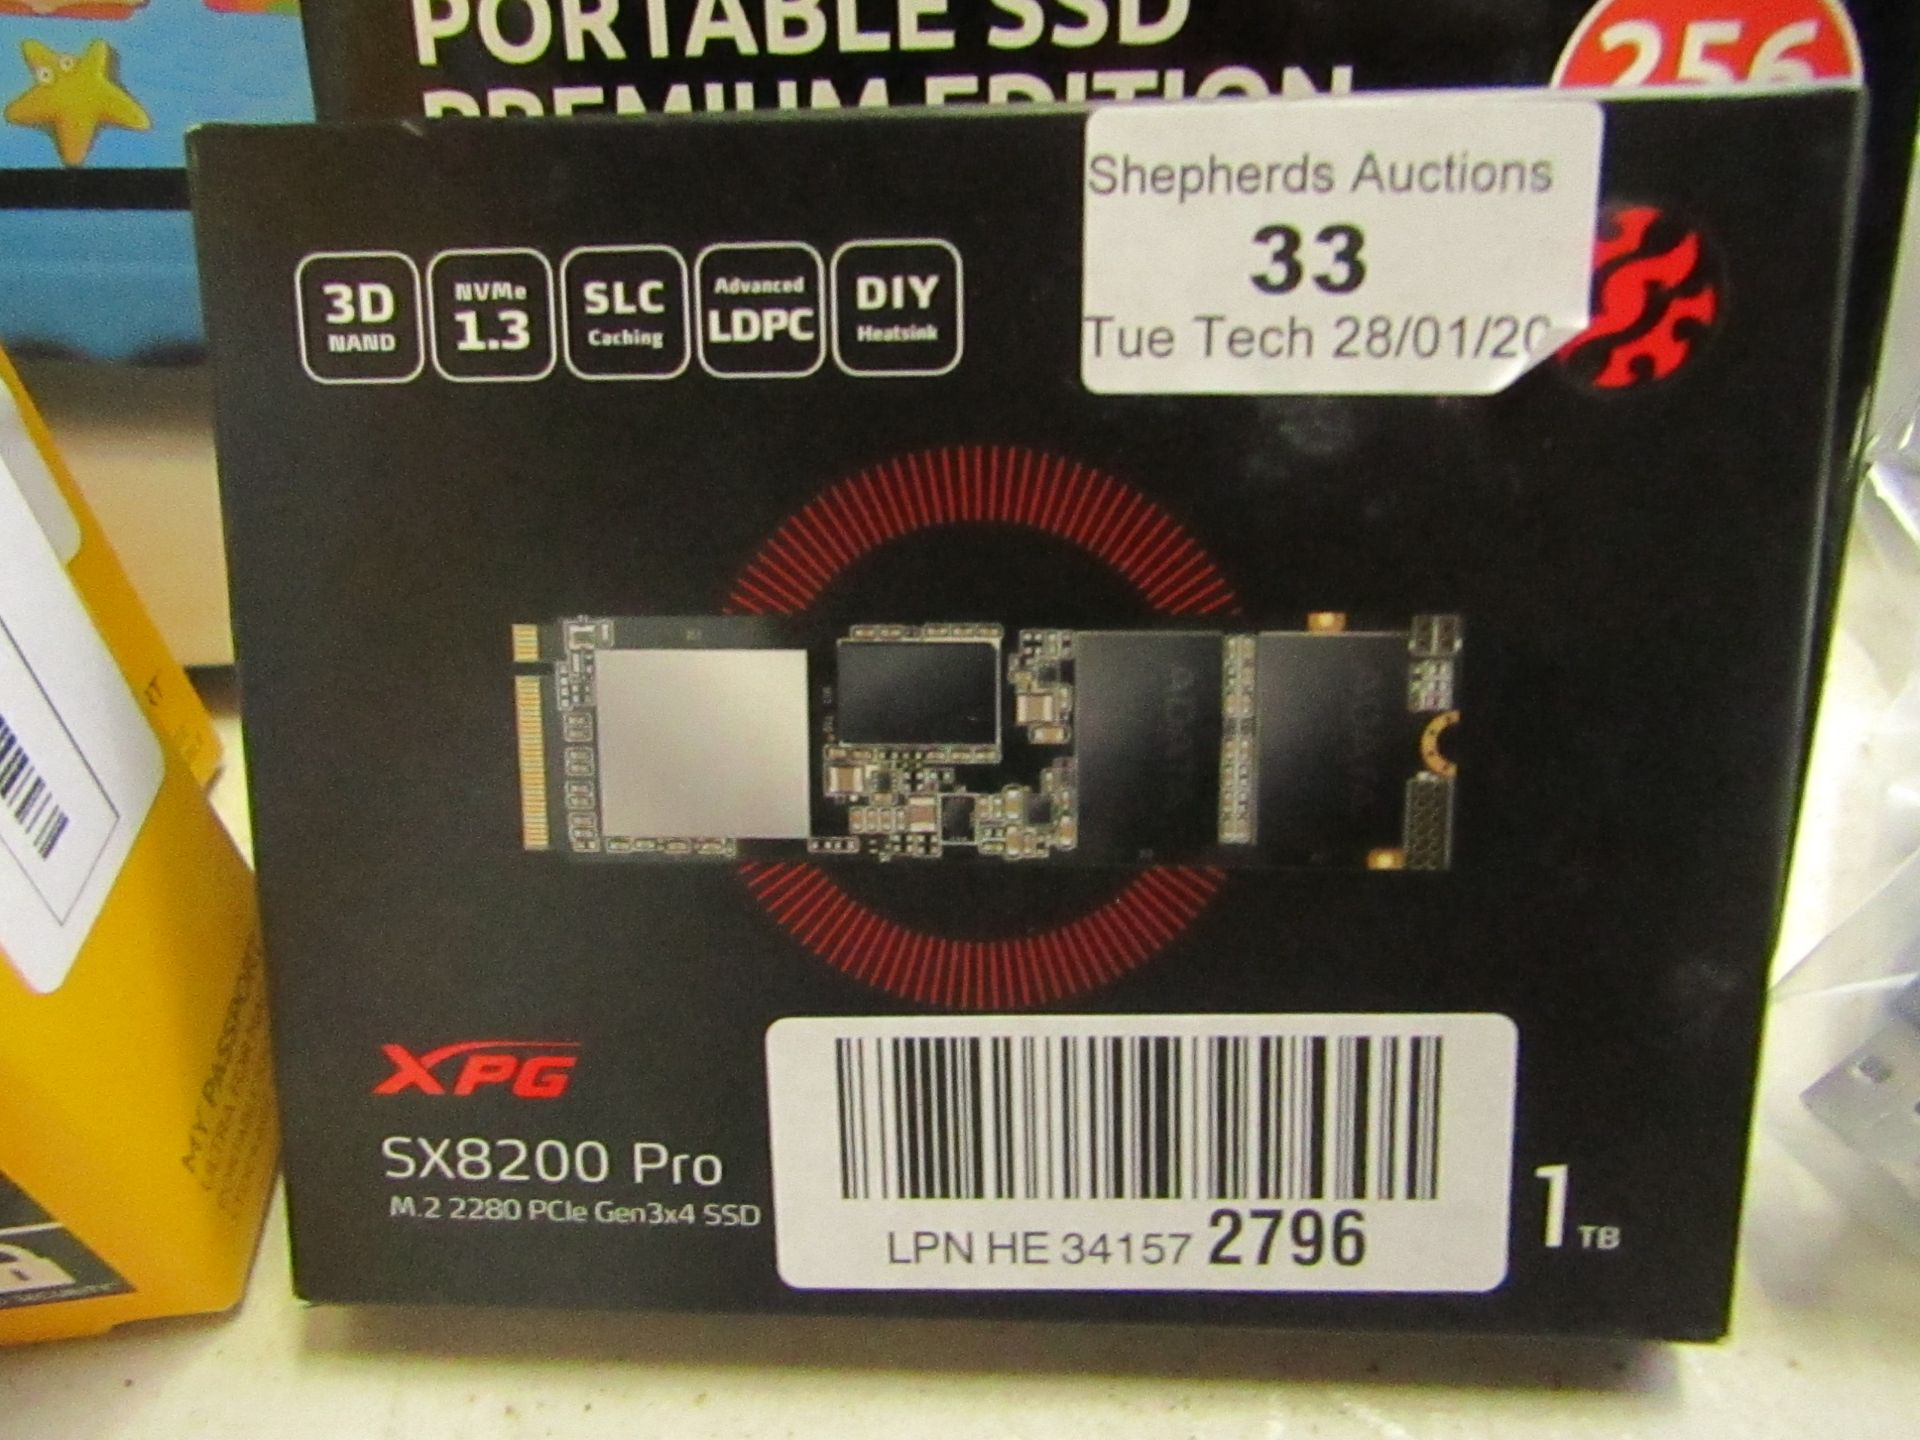 XPG SX8200 Pro 1TB SSD, untested and boxed.